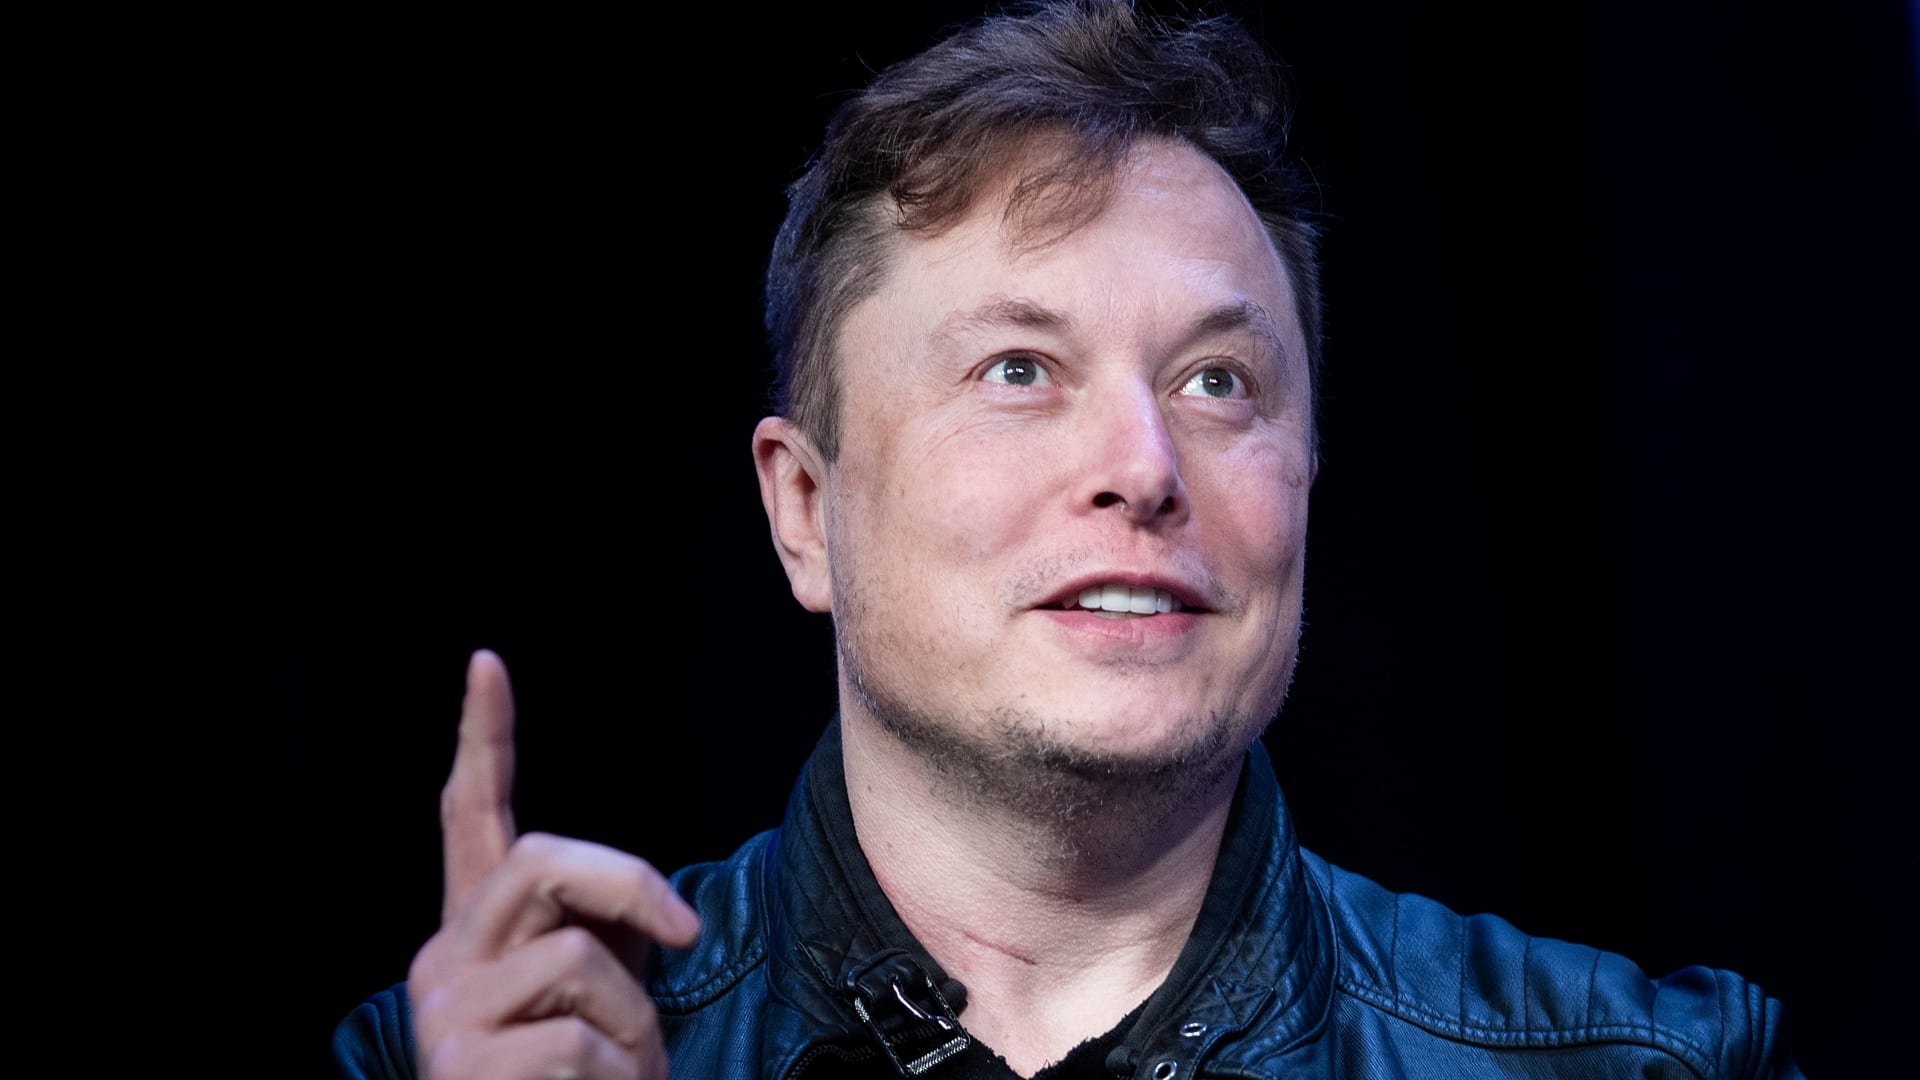 Elon Musk has the wrong approach to counting counterfeits, spam on Twitter: experts